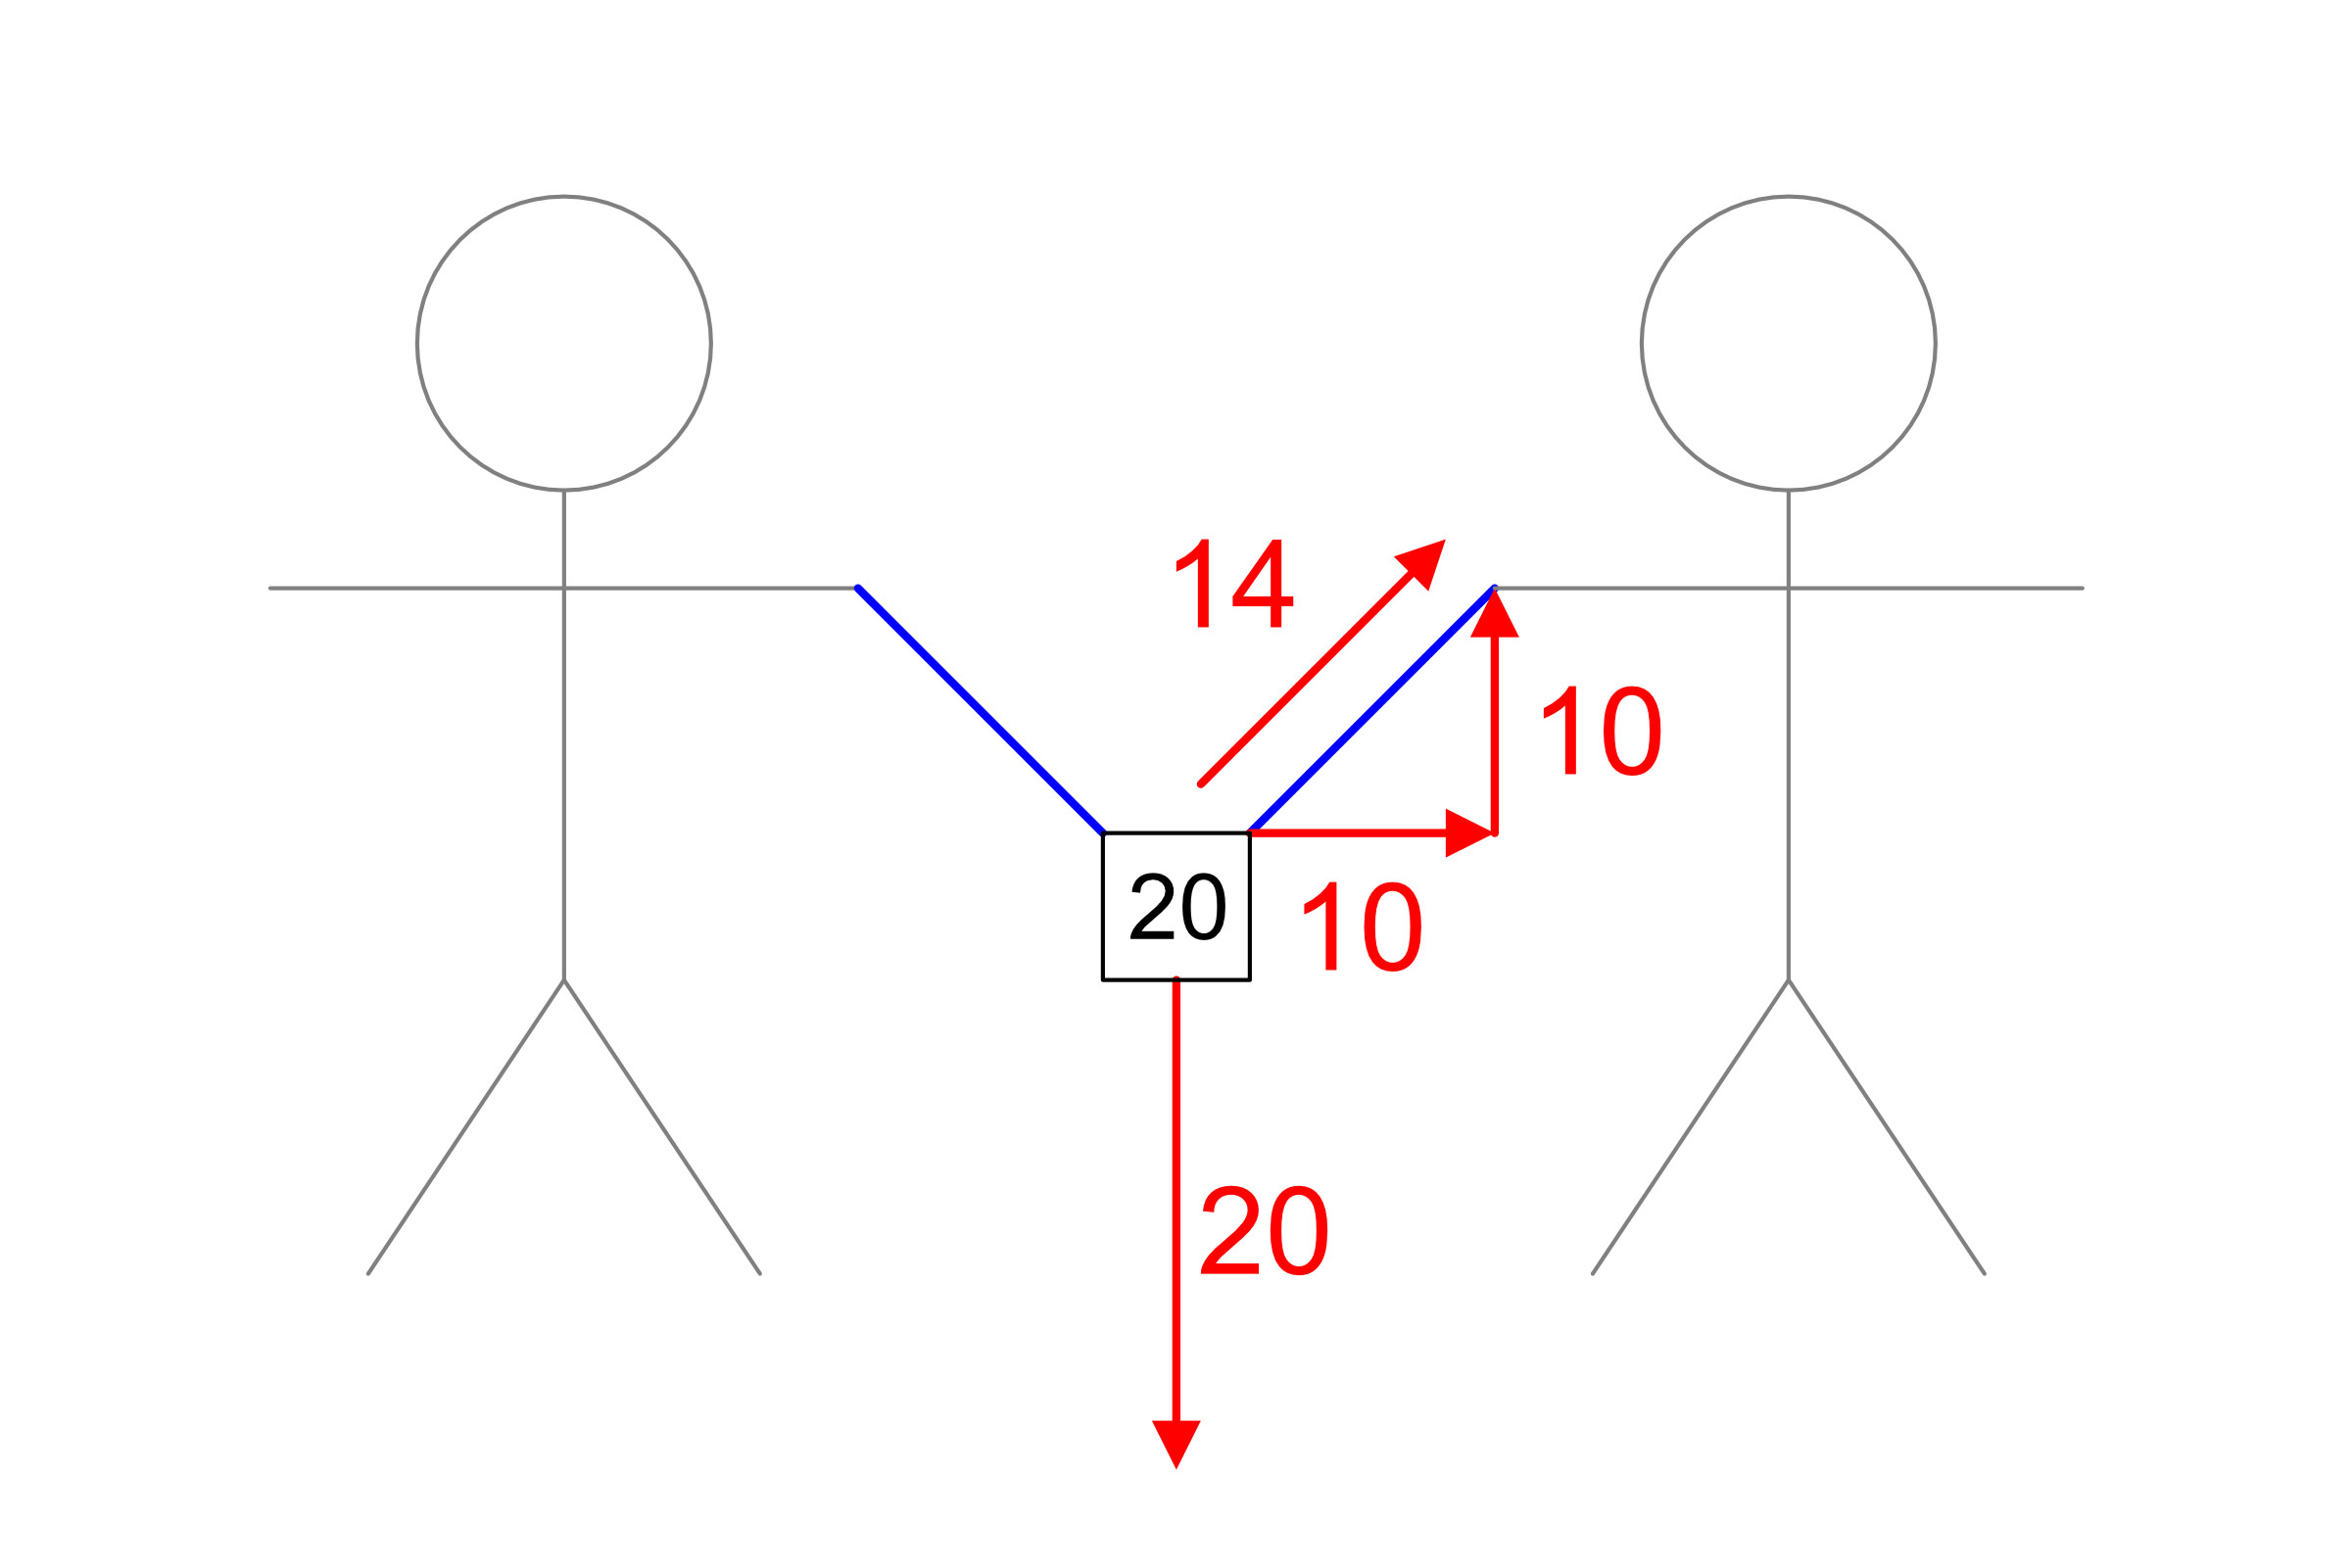 Two stick figures using blue ropes to lift a 20 pound weight, with red arrows indicating the force vectors involved.